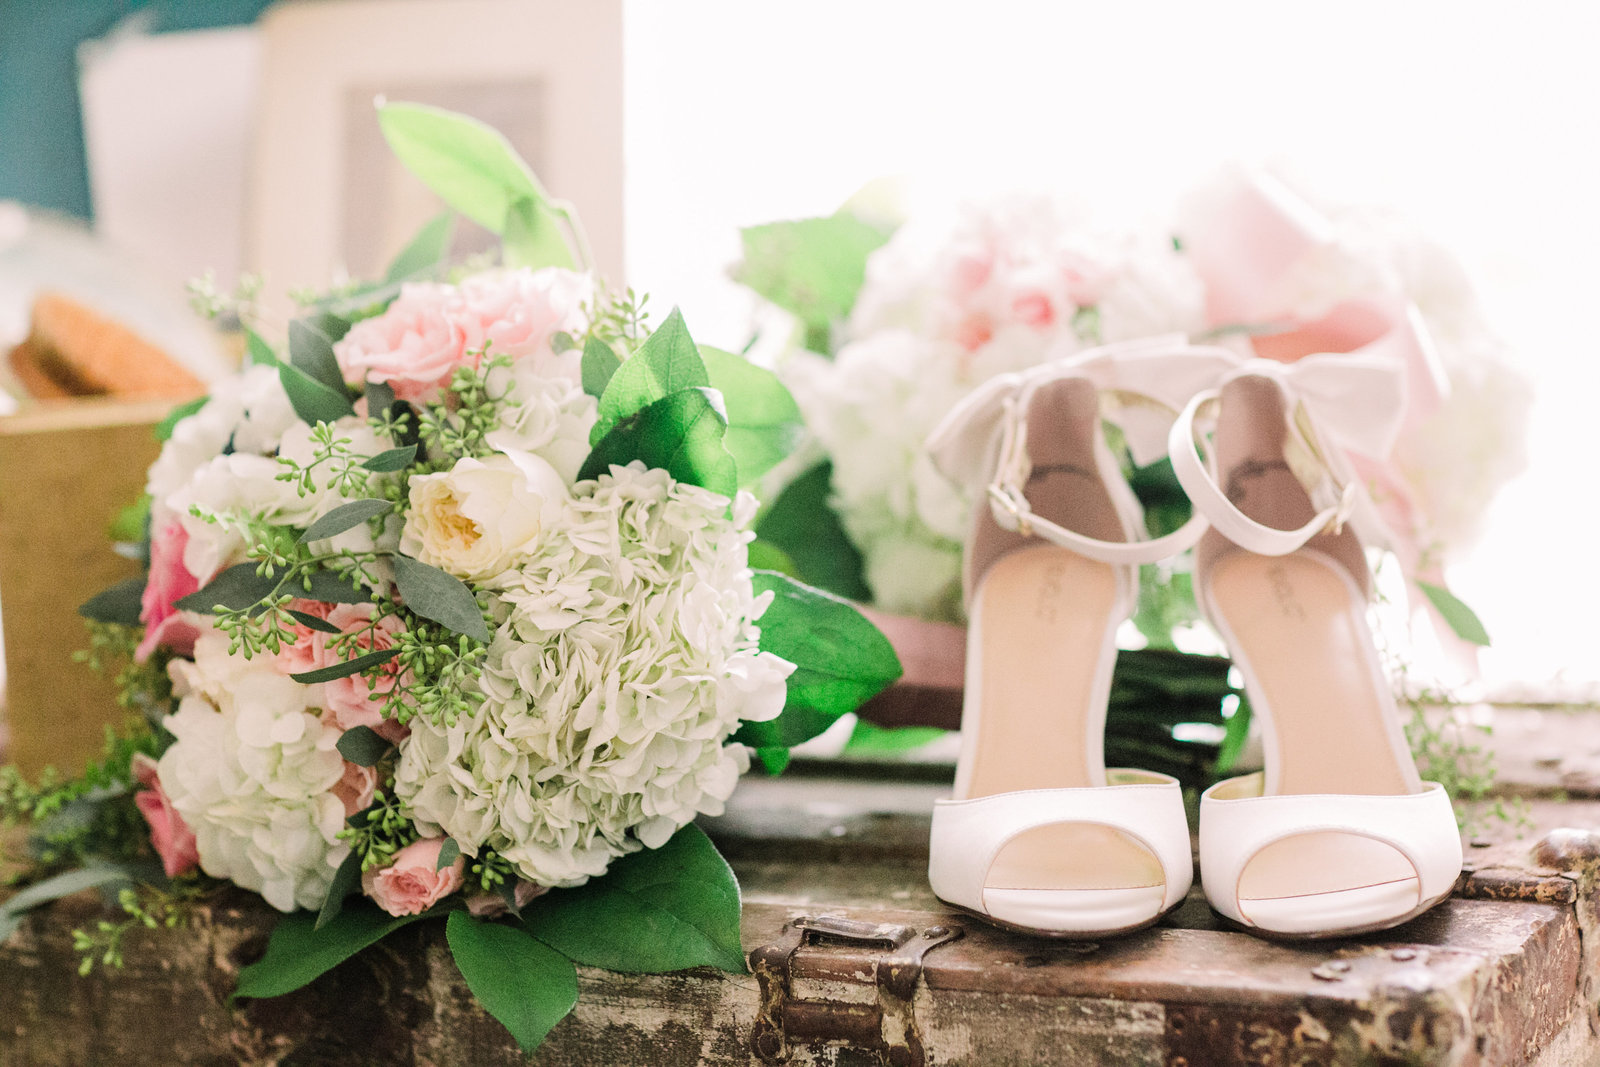 These details of Liz's wedding shoes and flowers pop in natural sunlight in the bridal cabin at Dodson Orchards